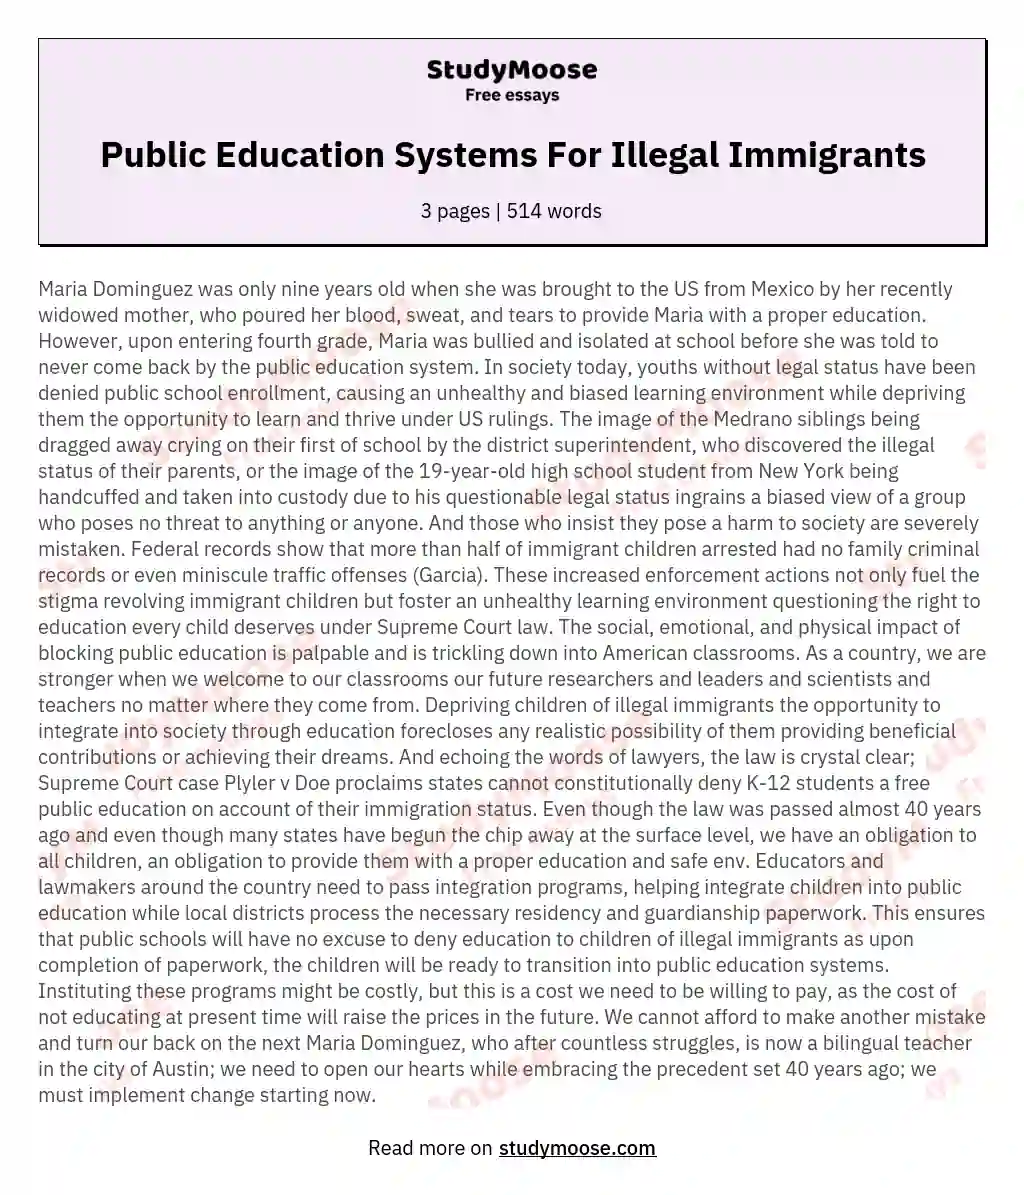 Public Education Systems For Illegal Immigrants essay